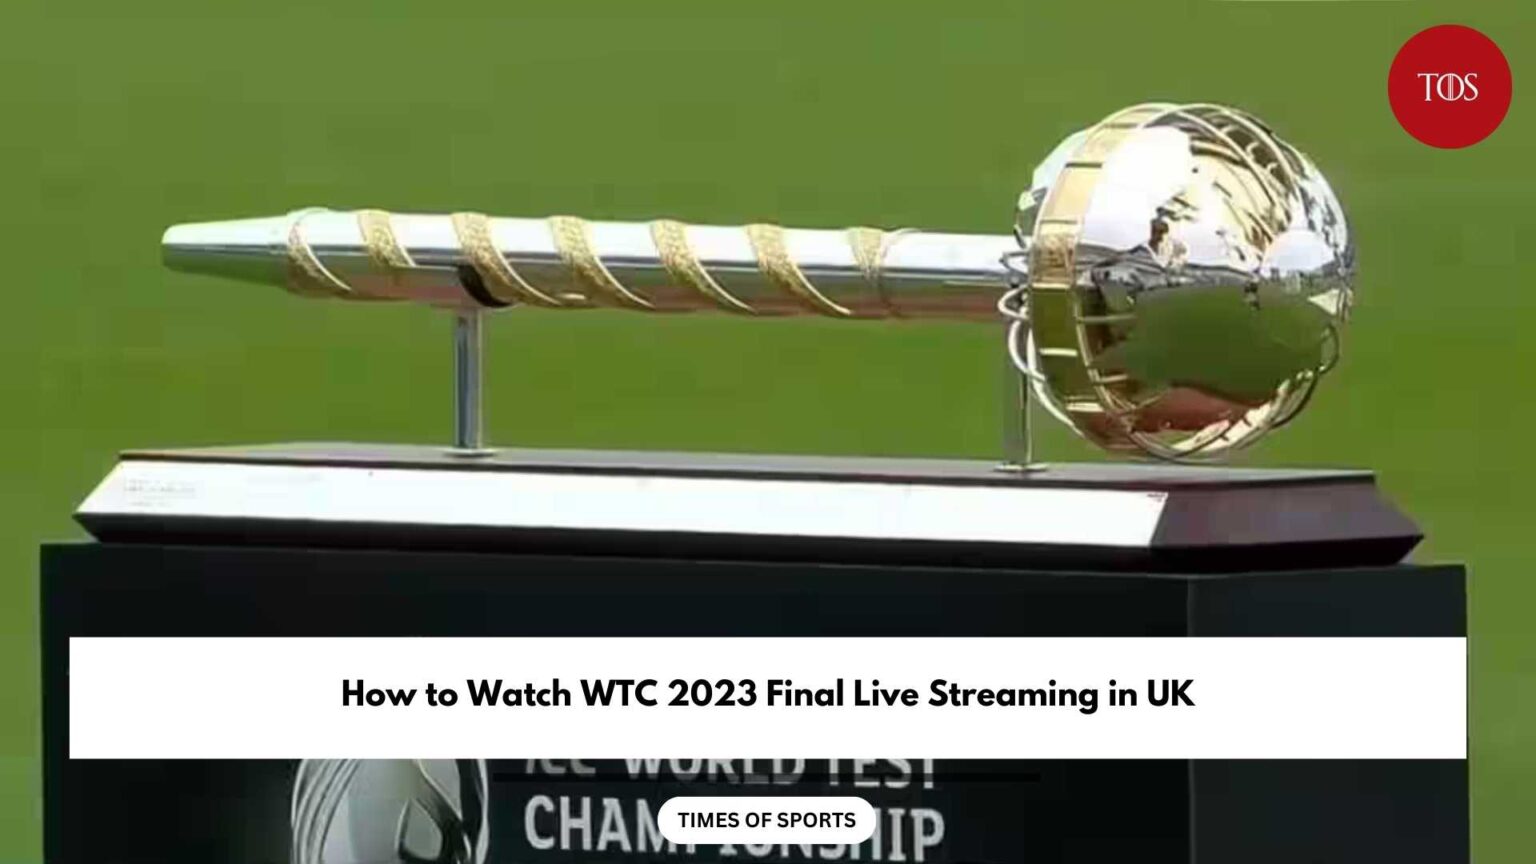 How to Watch WTC 2023 Final Live Streaming in UK